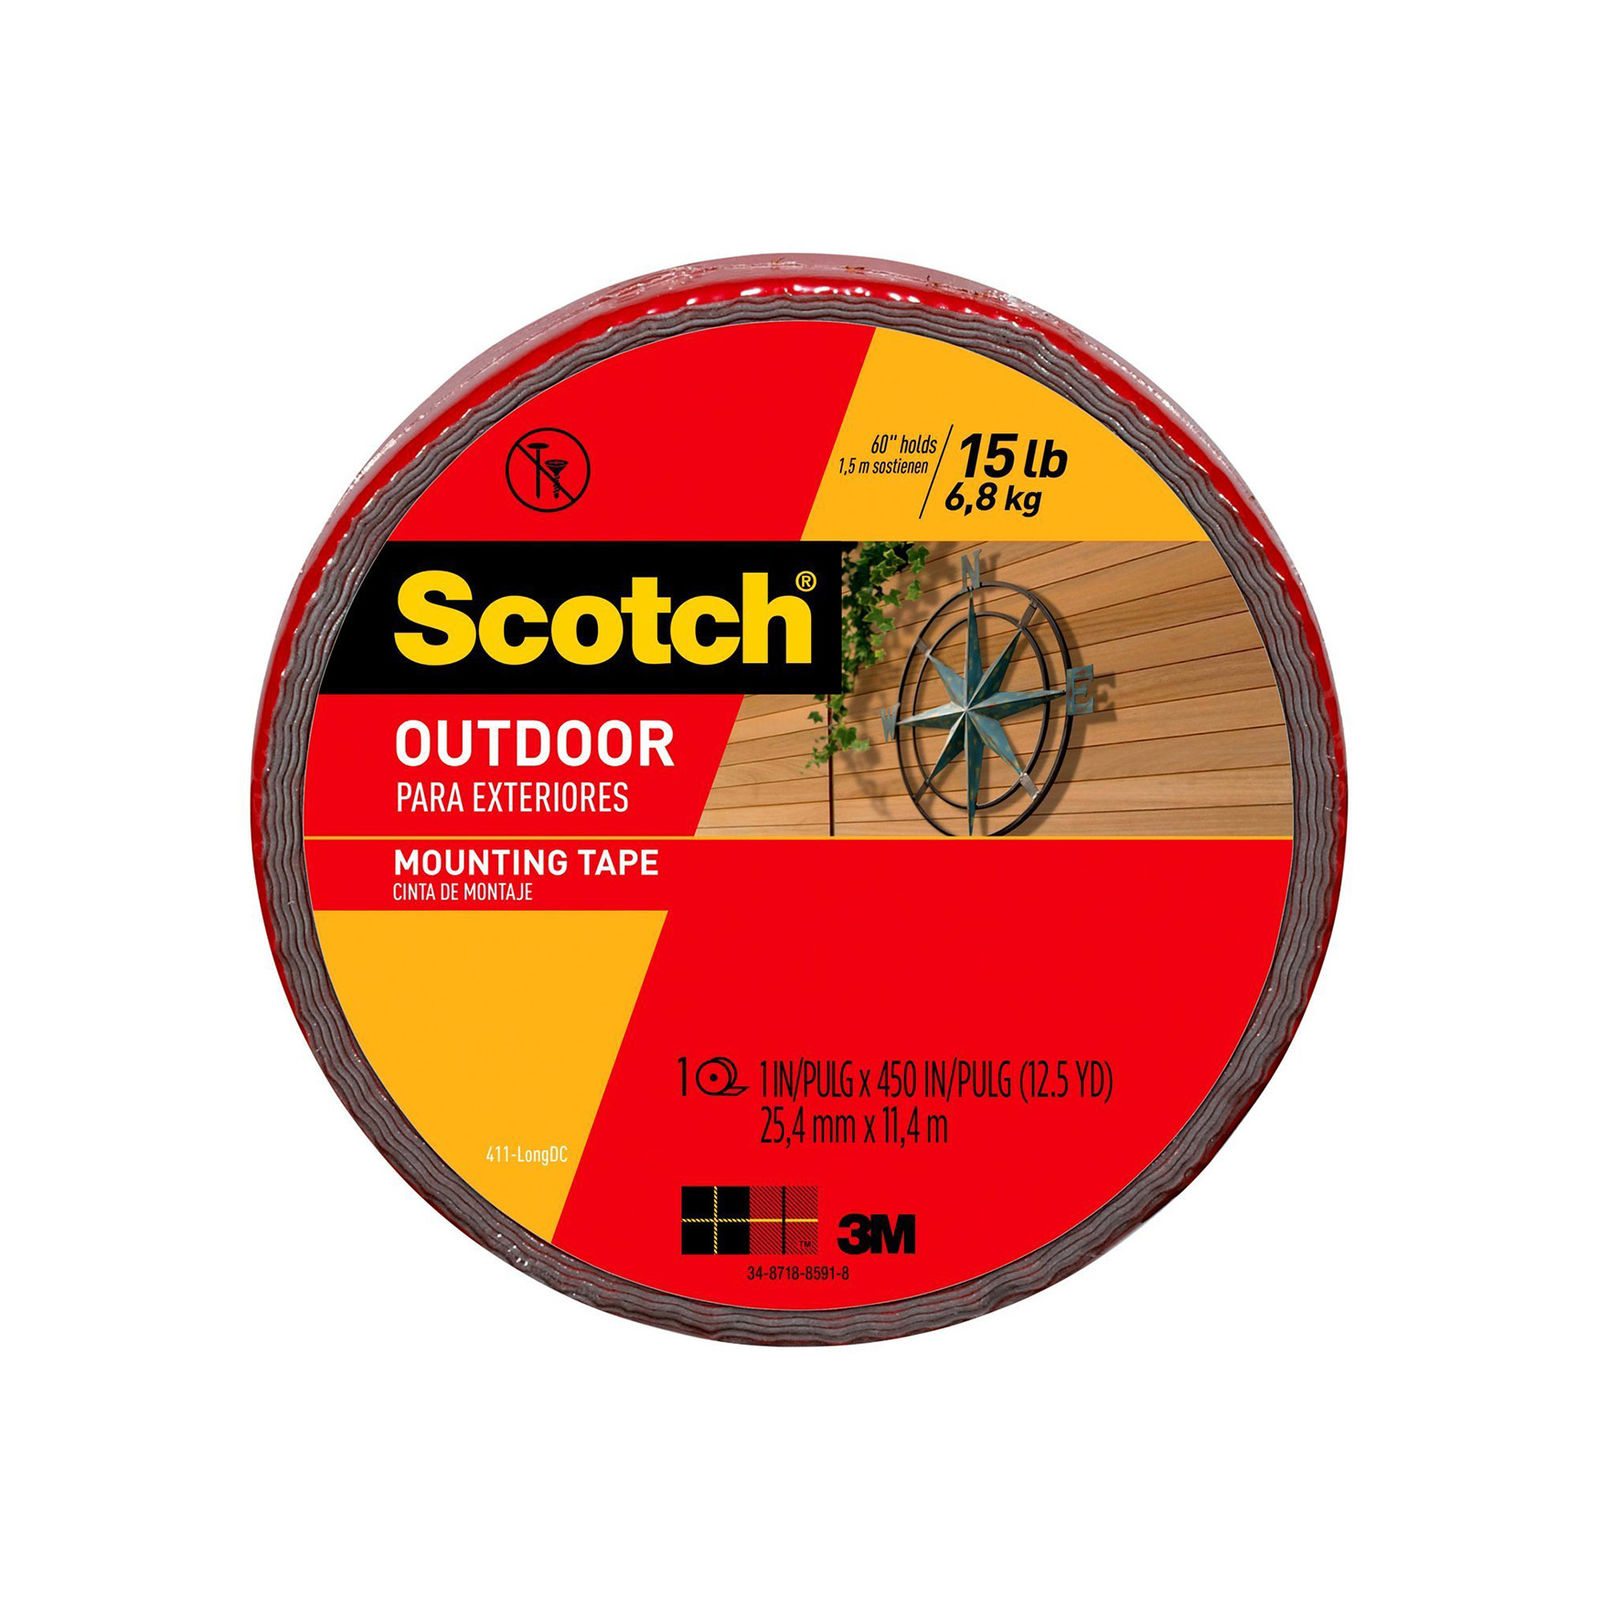 Scotch Outdoor Mounting Tape, 1-inch x 450-inches